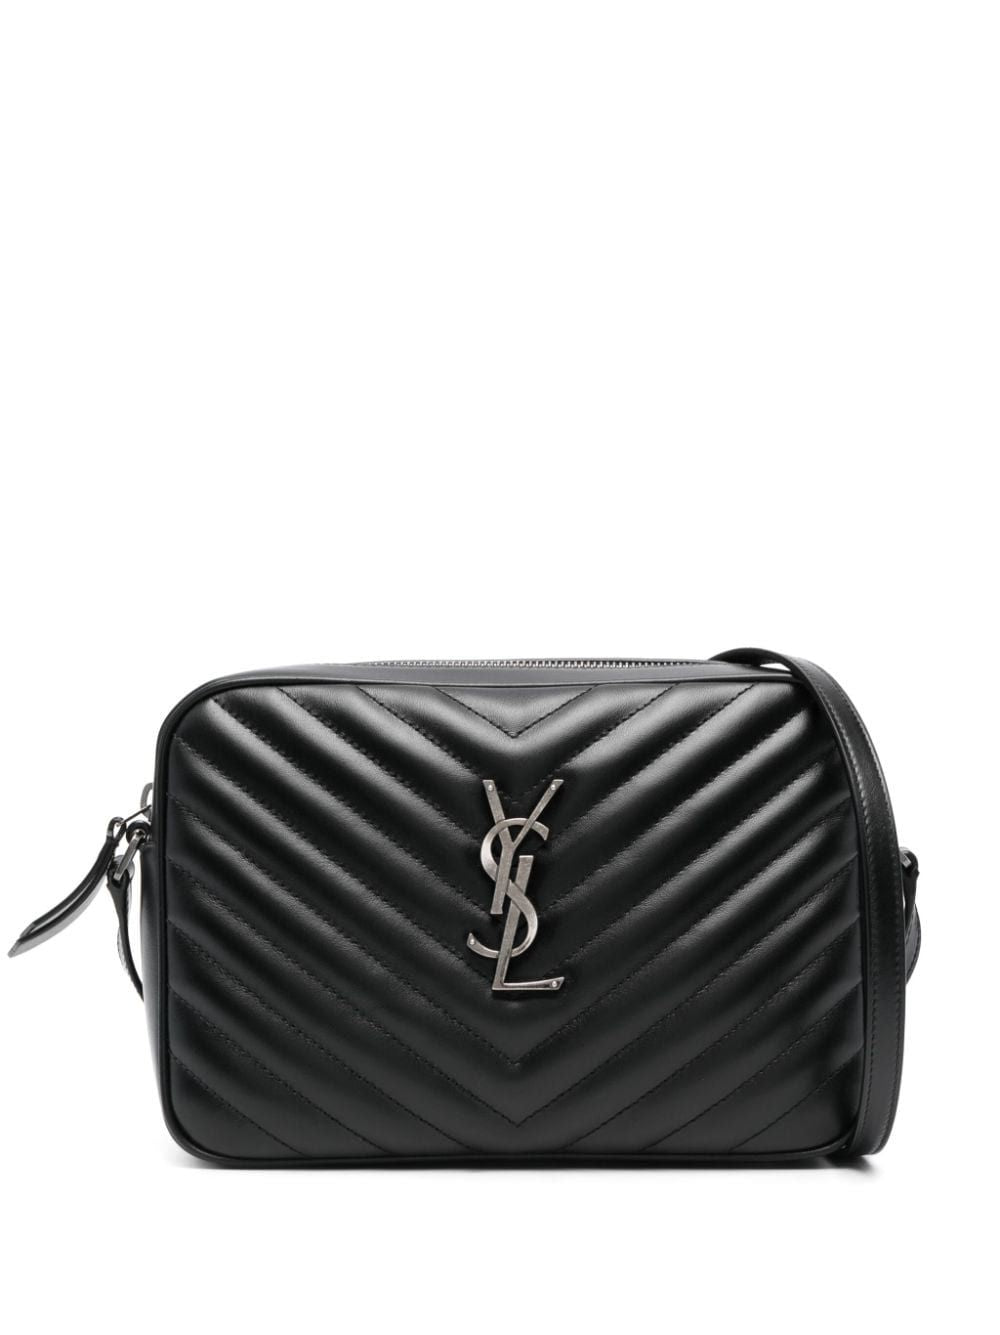 SAINT LAURENT Transform Your Everyday Look with this Luxurious Black Quilted Crossbody Handbag